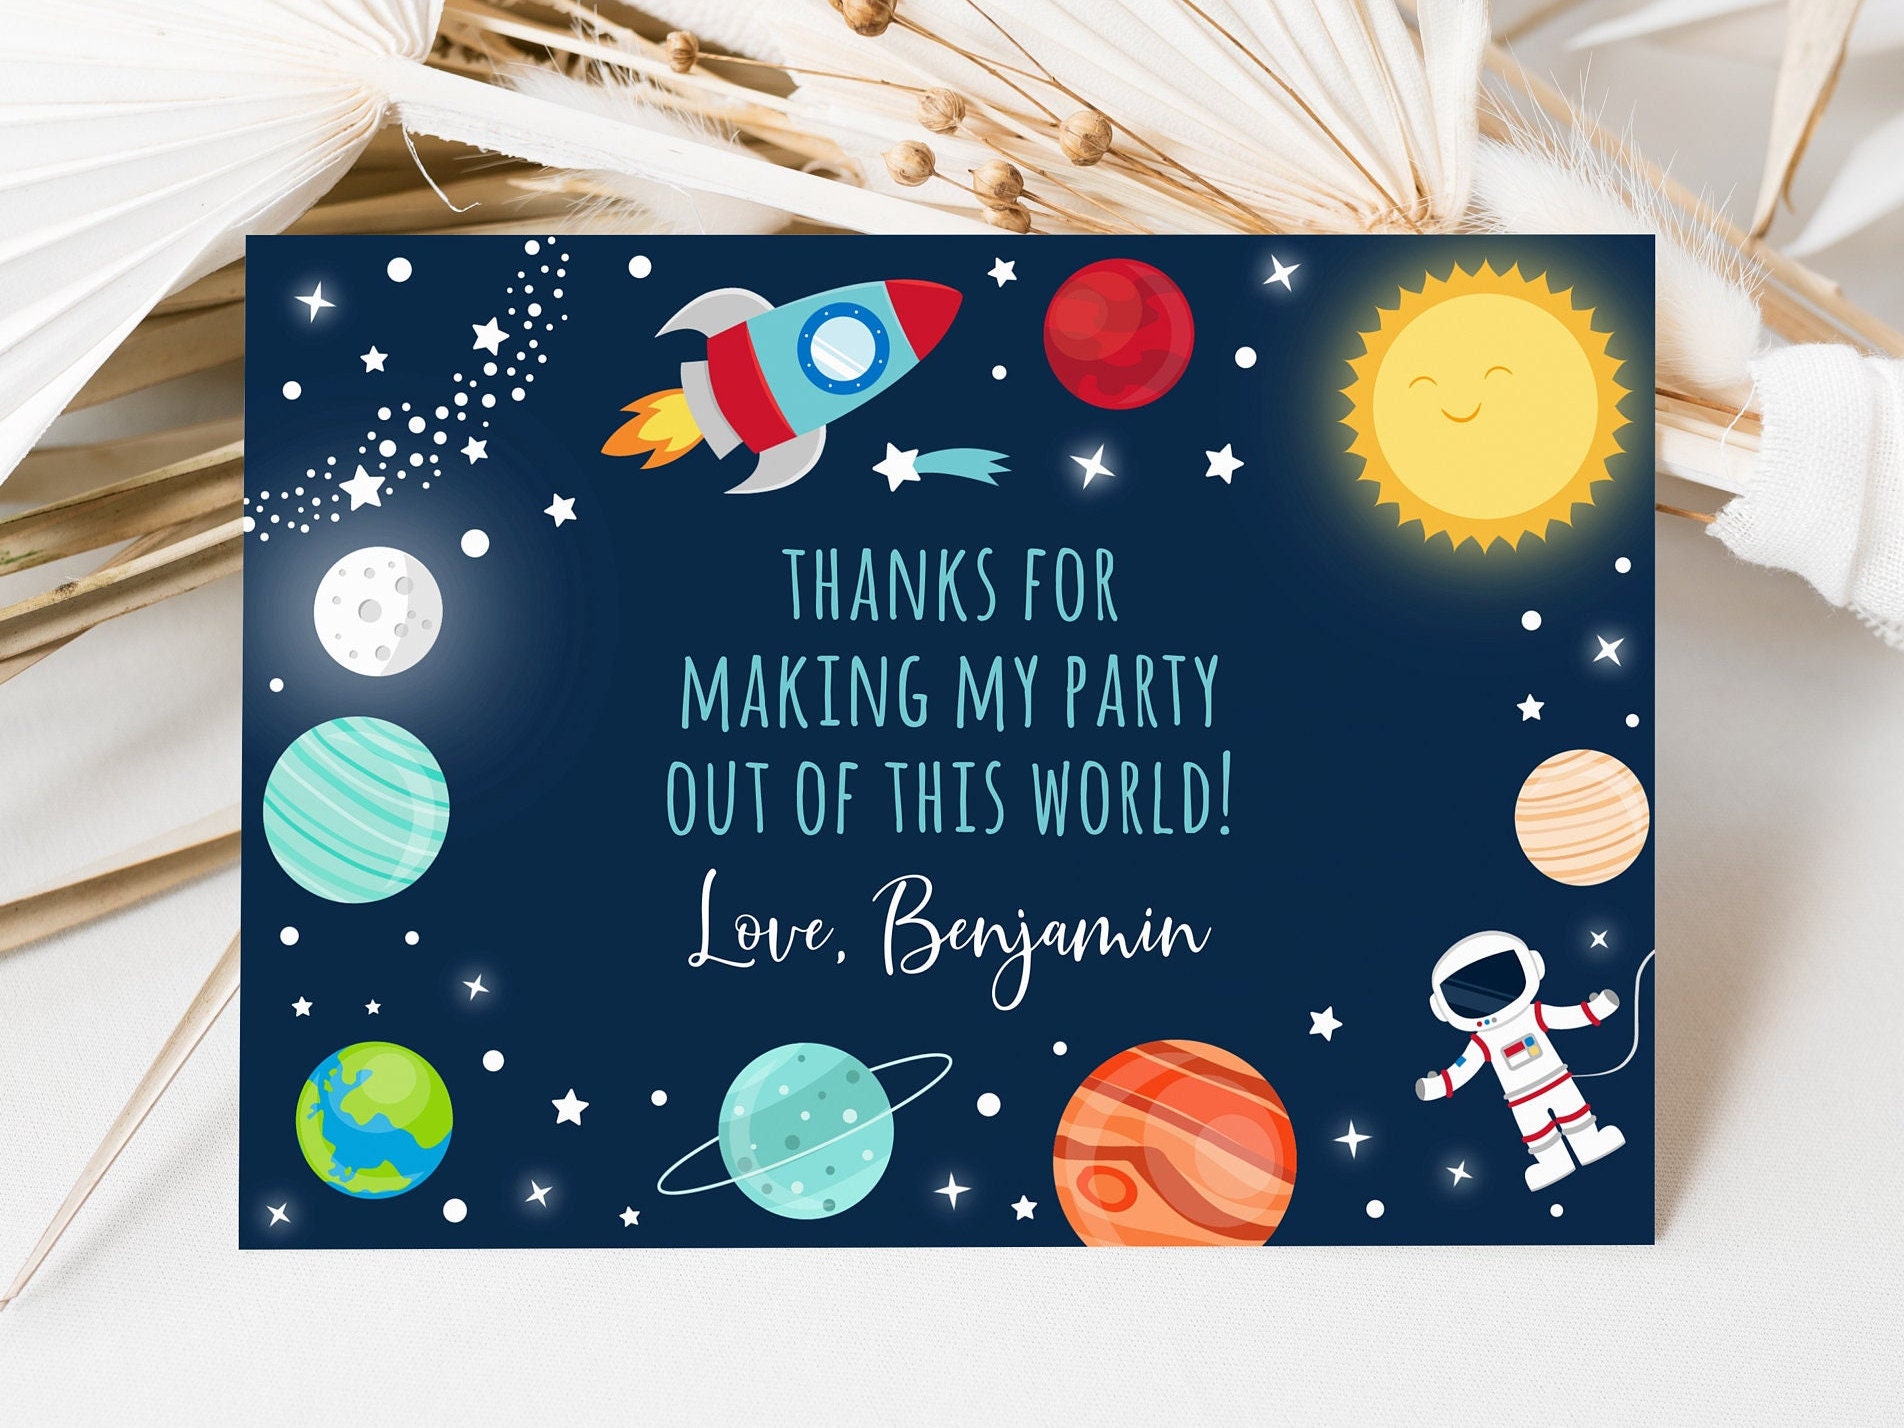 Space Theme Party Favor, Crayon names, Crayons, Birthday Party